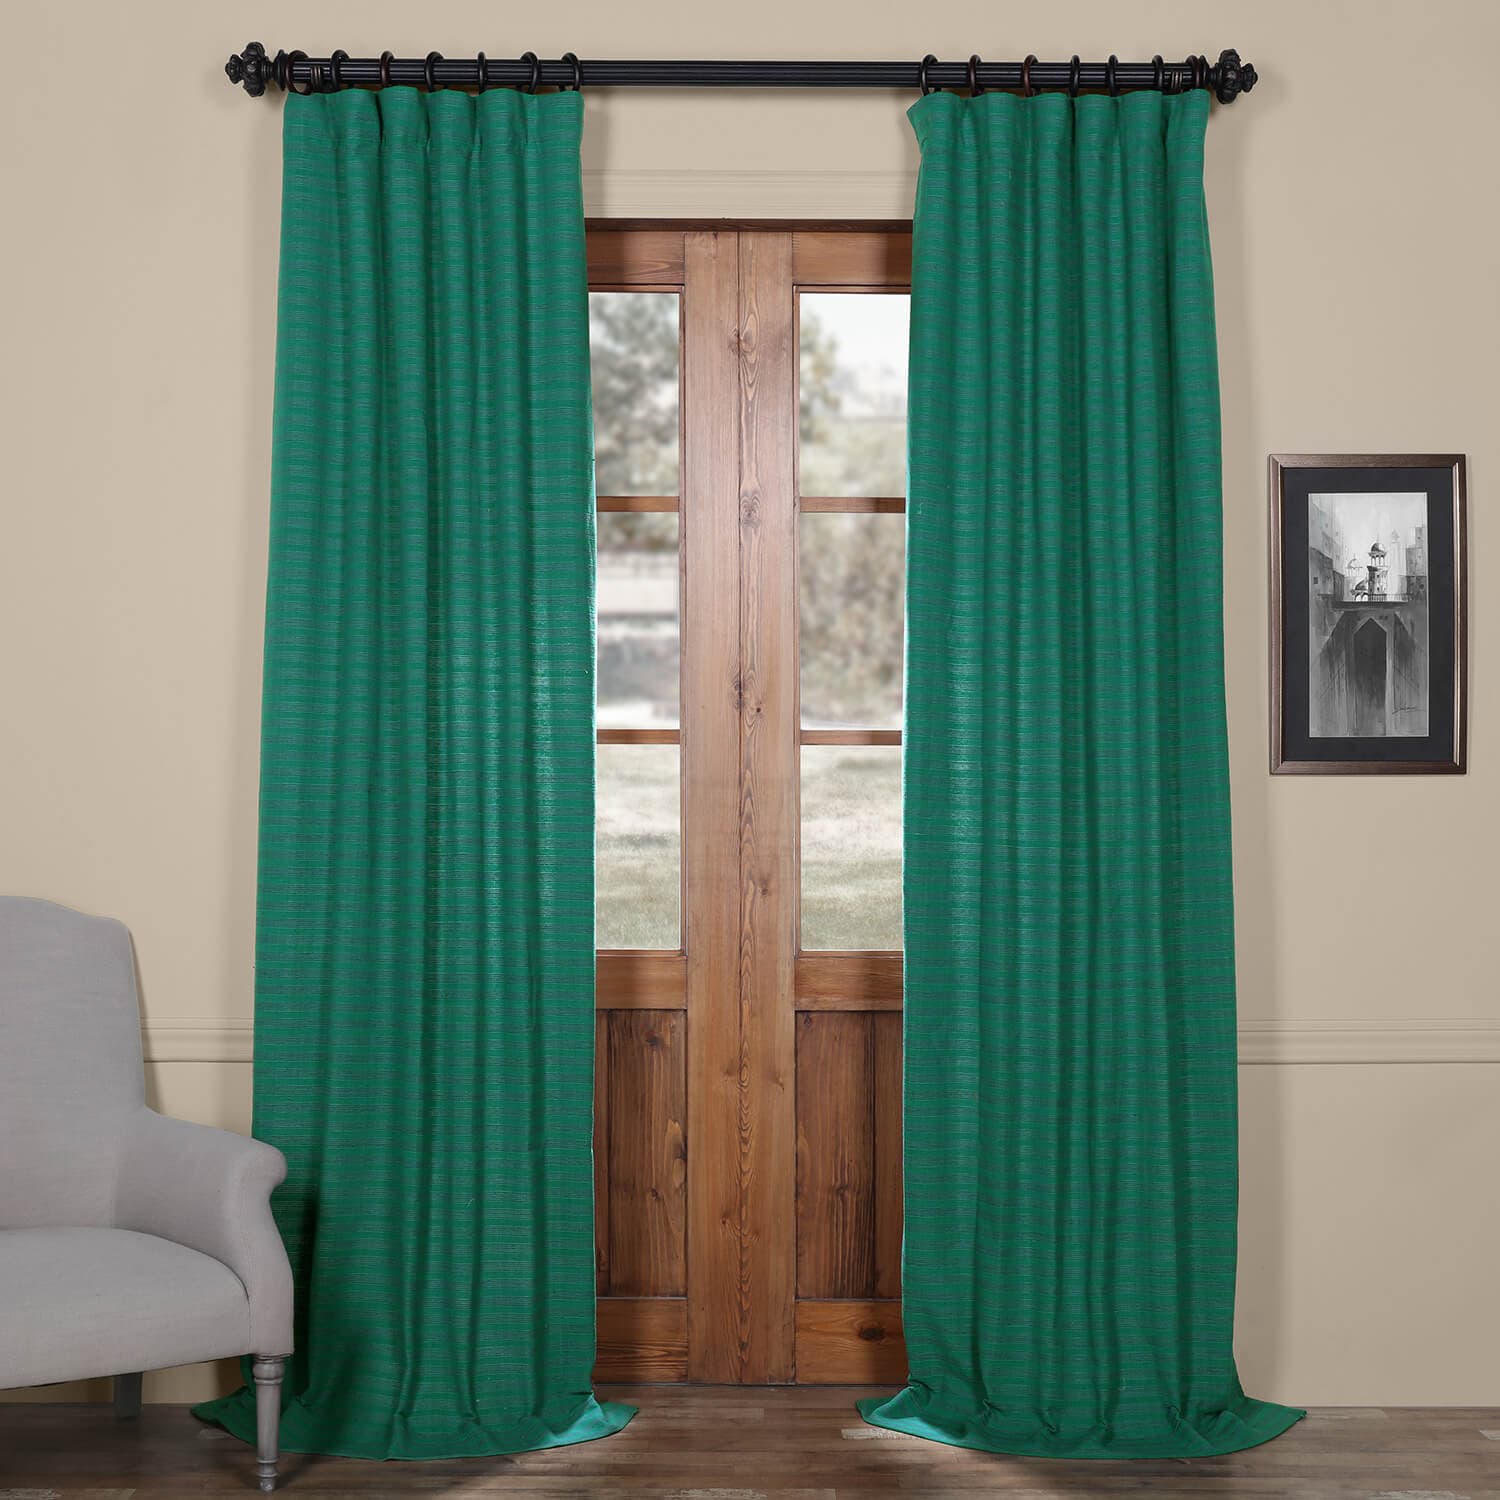 Teal Hand Weaved Cotton Curtain